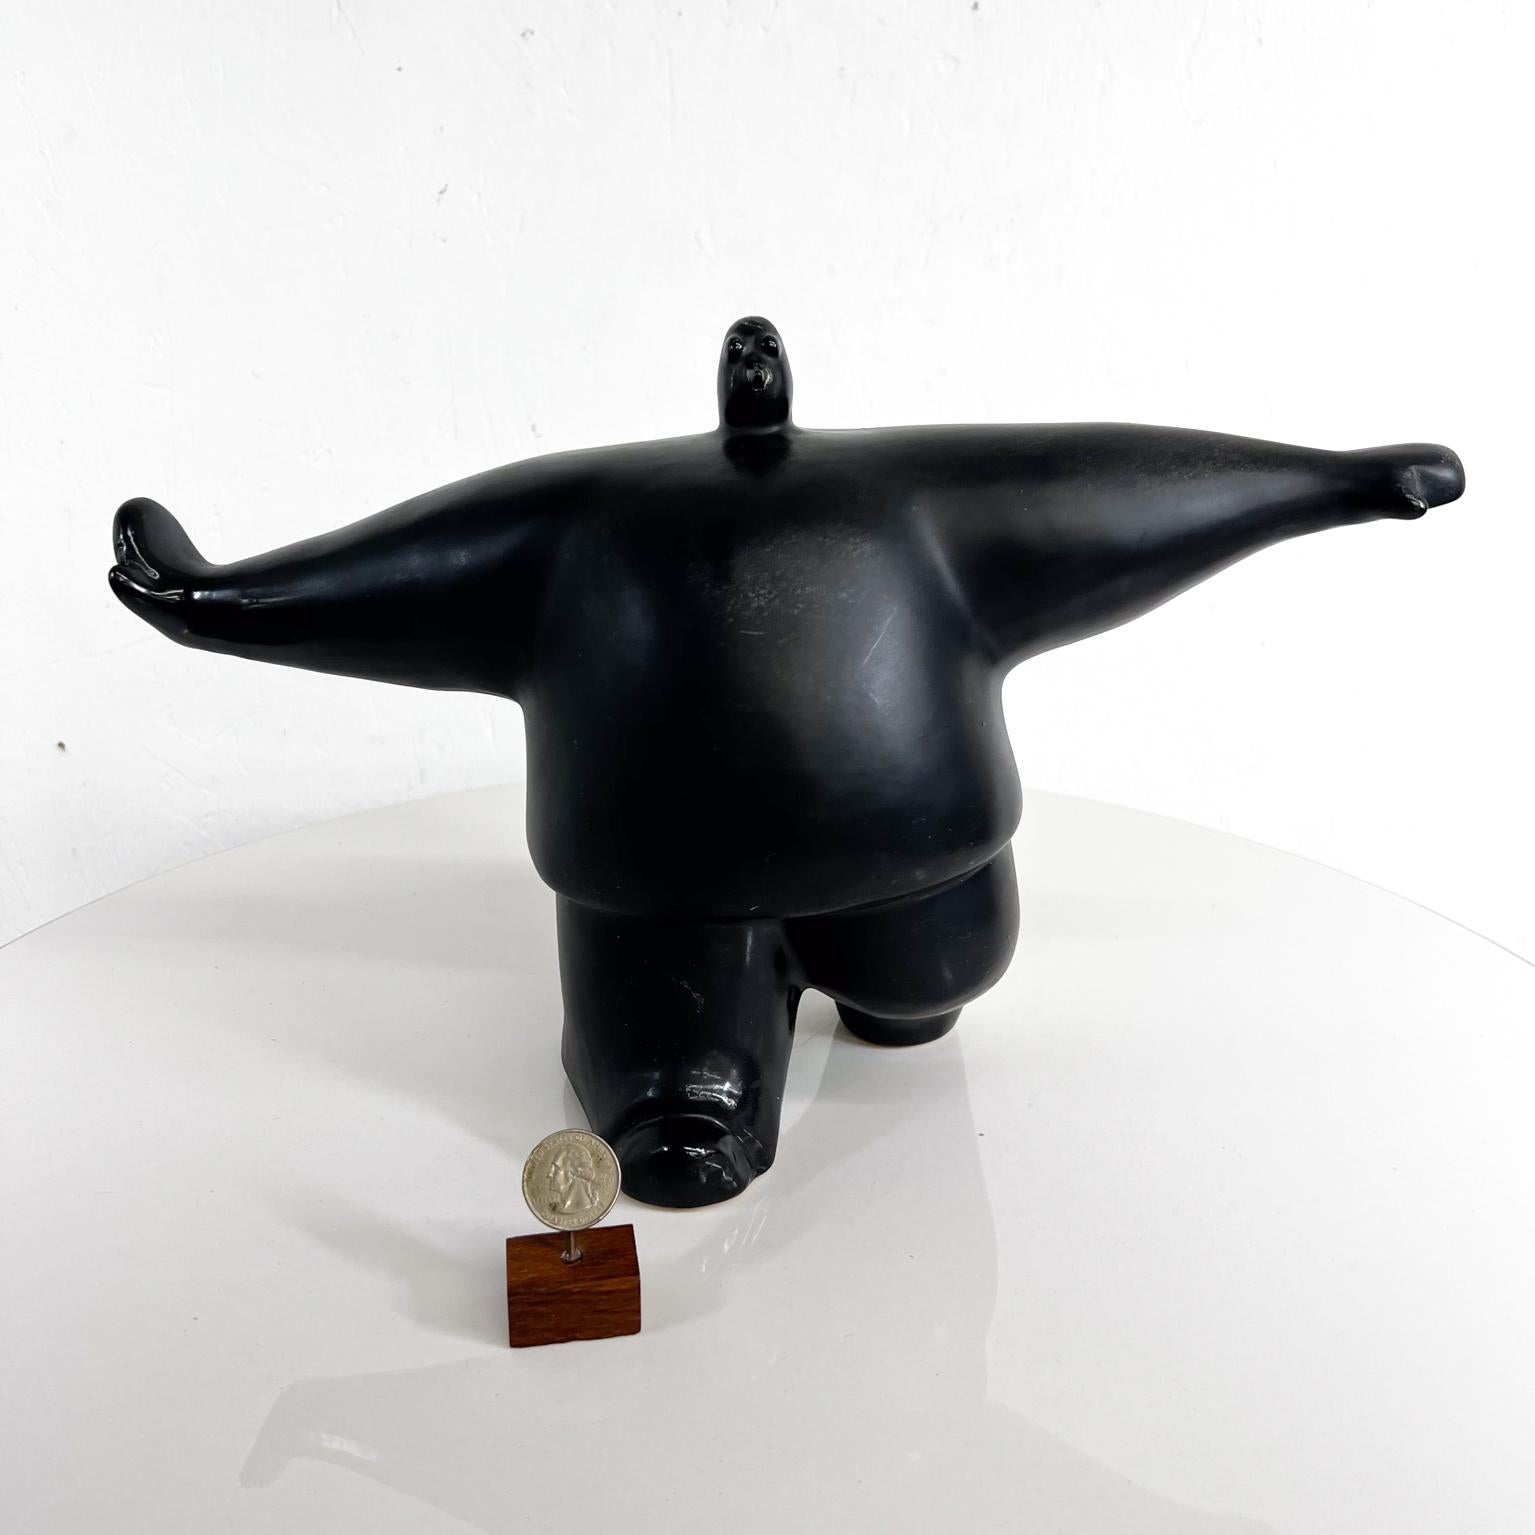 1990s Modern Art Style of Fernando Botero Exaggerated Ceramic Sculpture
14.75 w x 5 d x 9.5 h
Style resembles Boterismo
Unmarked
Original preowned vintage condition.
Refer to provided images.

